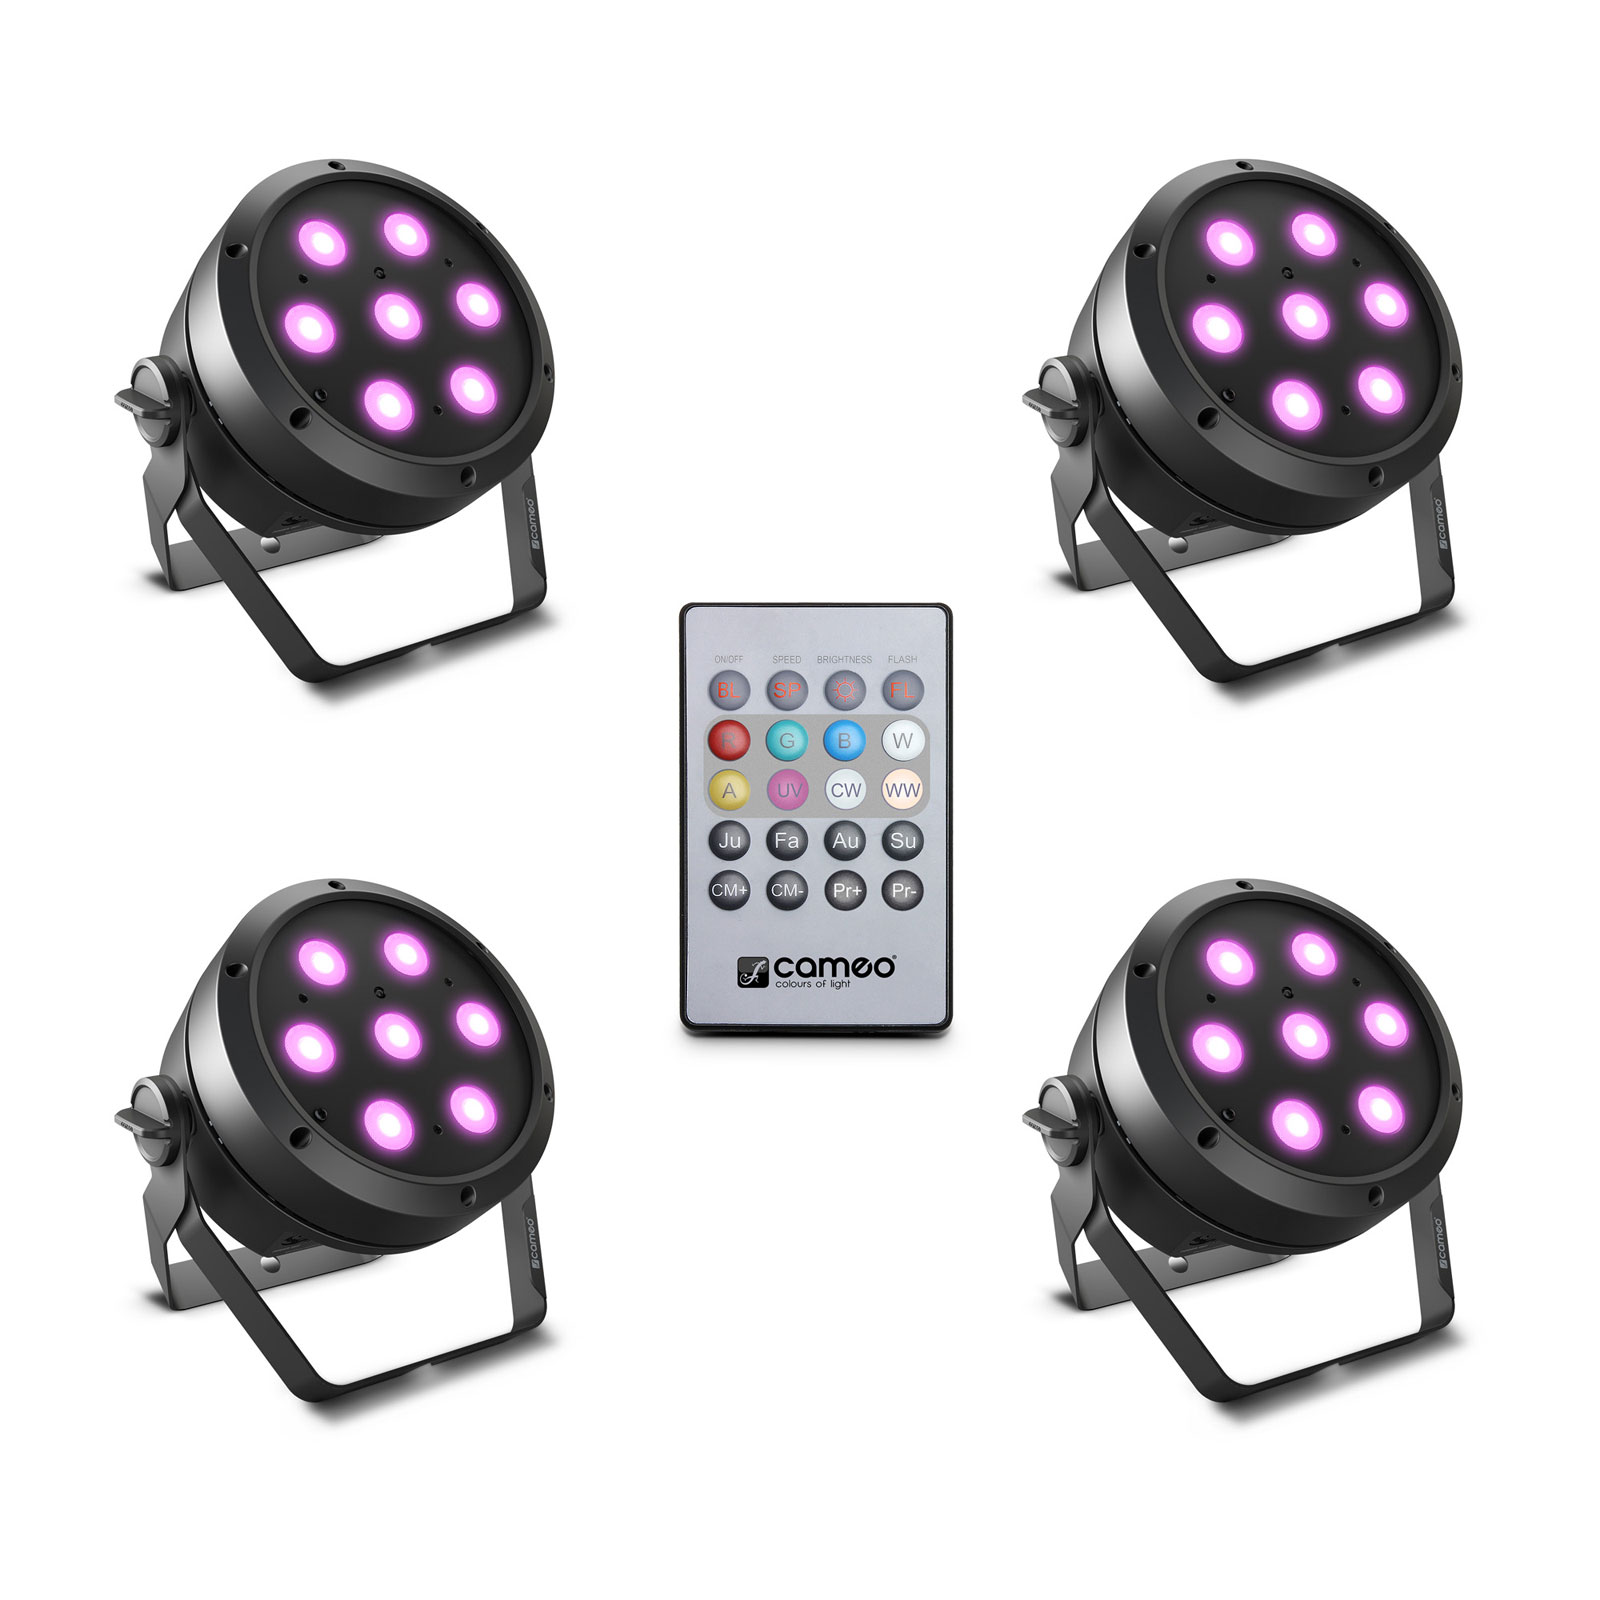 CAMEO ROOT PAR 4 SET 1 - SET COMPOSED OF 4 X CLROOTPAR4 WITH INFRARED REMOTE CONTROL